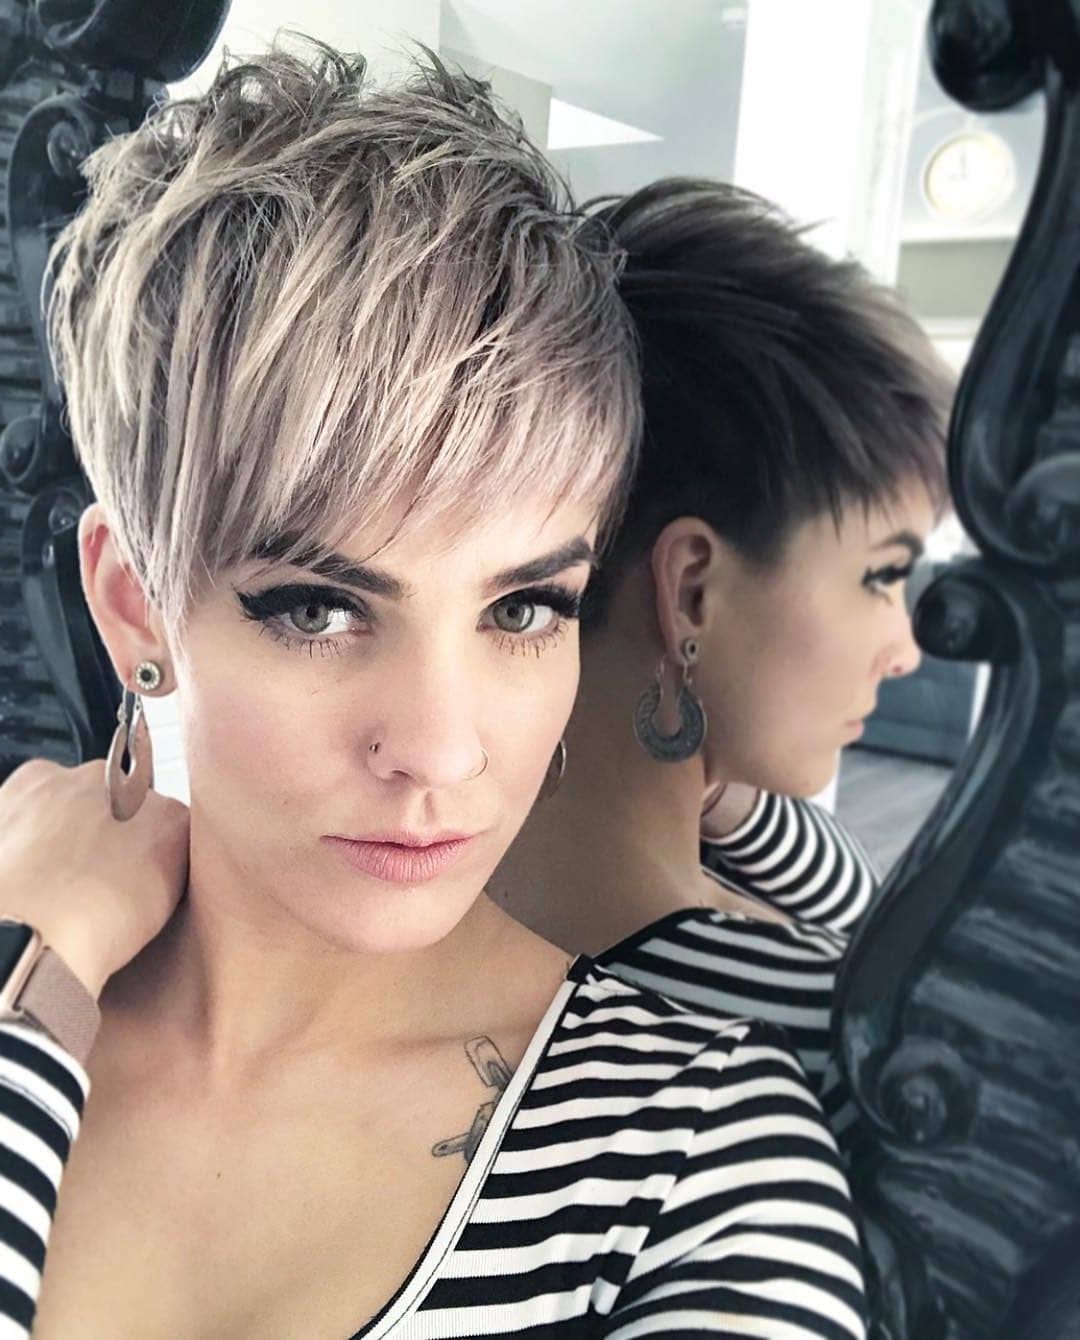 Favorite Edgy & Chic Short Curls Pixie Haircuts For Top 10 Most Flattering Pixie Haircuts For Women, Short Hair (View 12 of 20)